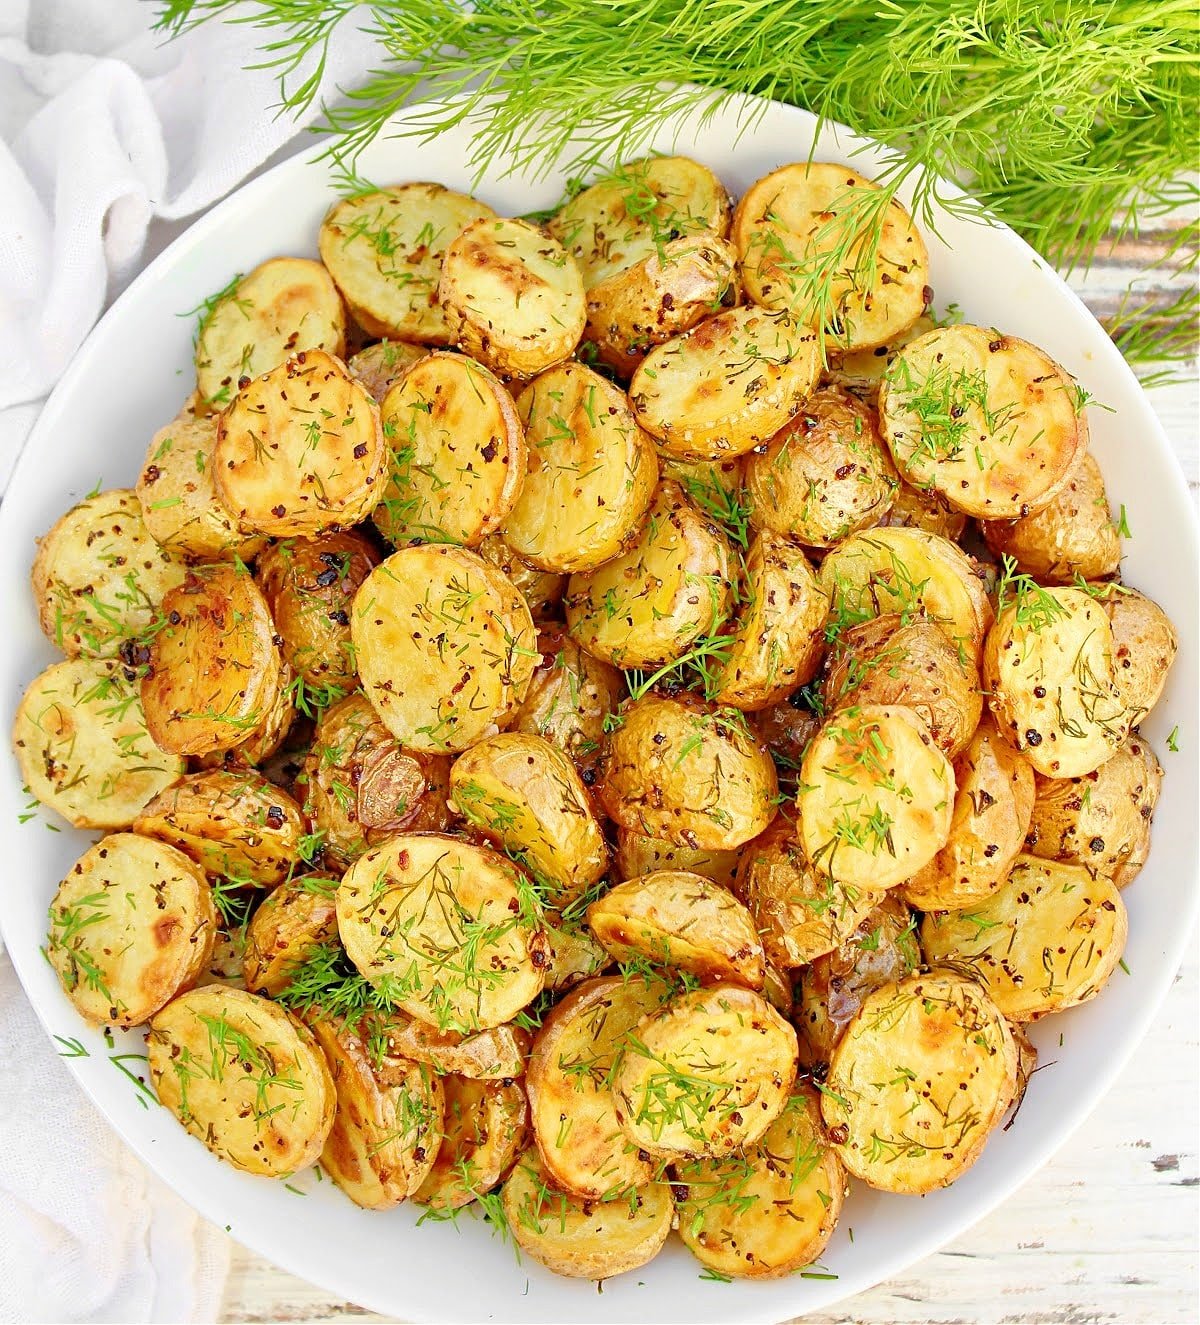 New potatoes with garlic and dill  K33 Kitchen - Delicious plant-based  vegan recipes